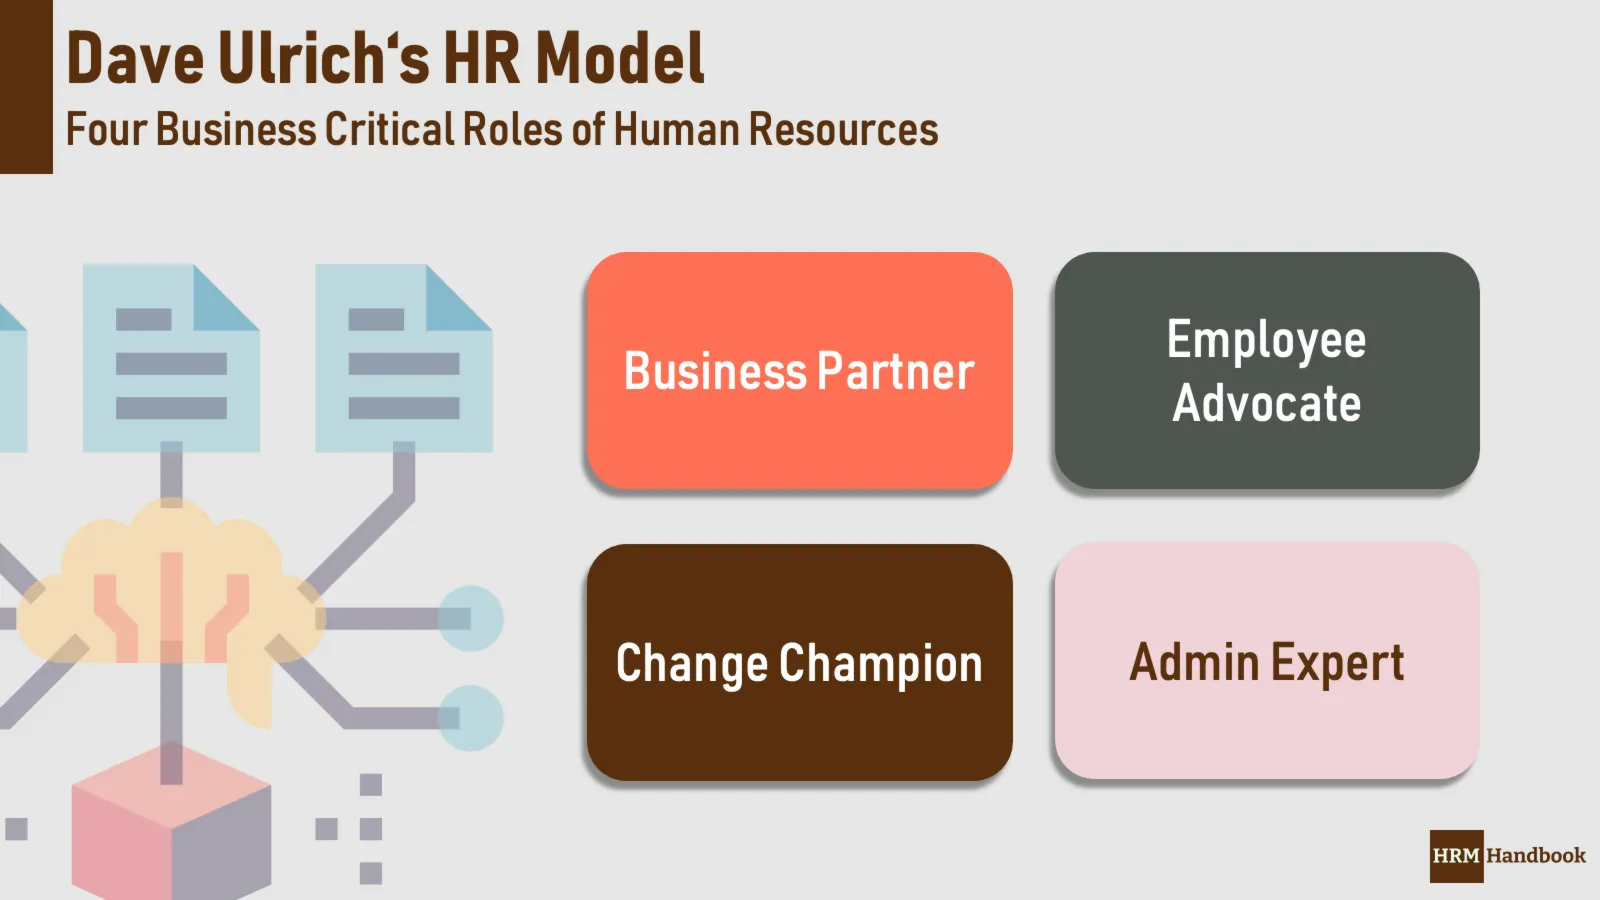 4 HR Roles as defined by Dave Ulrich in his HR Model